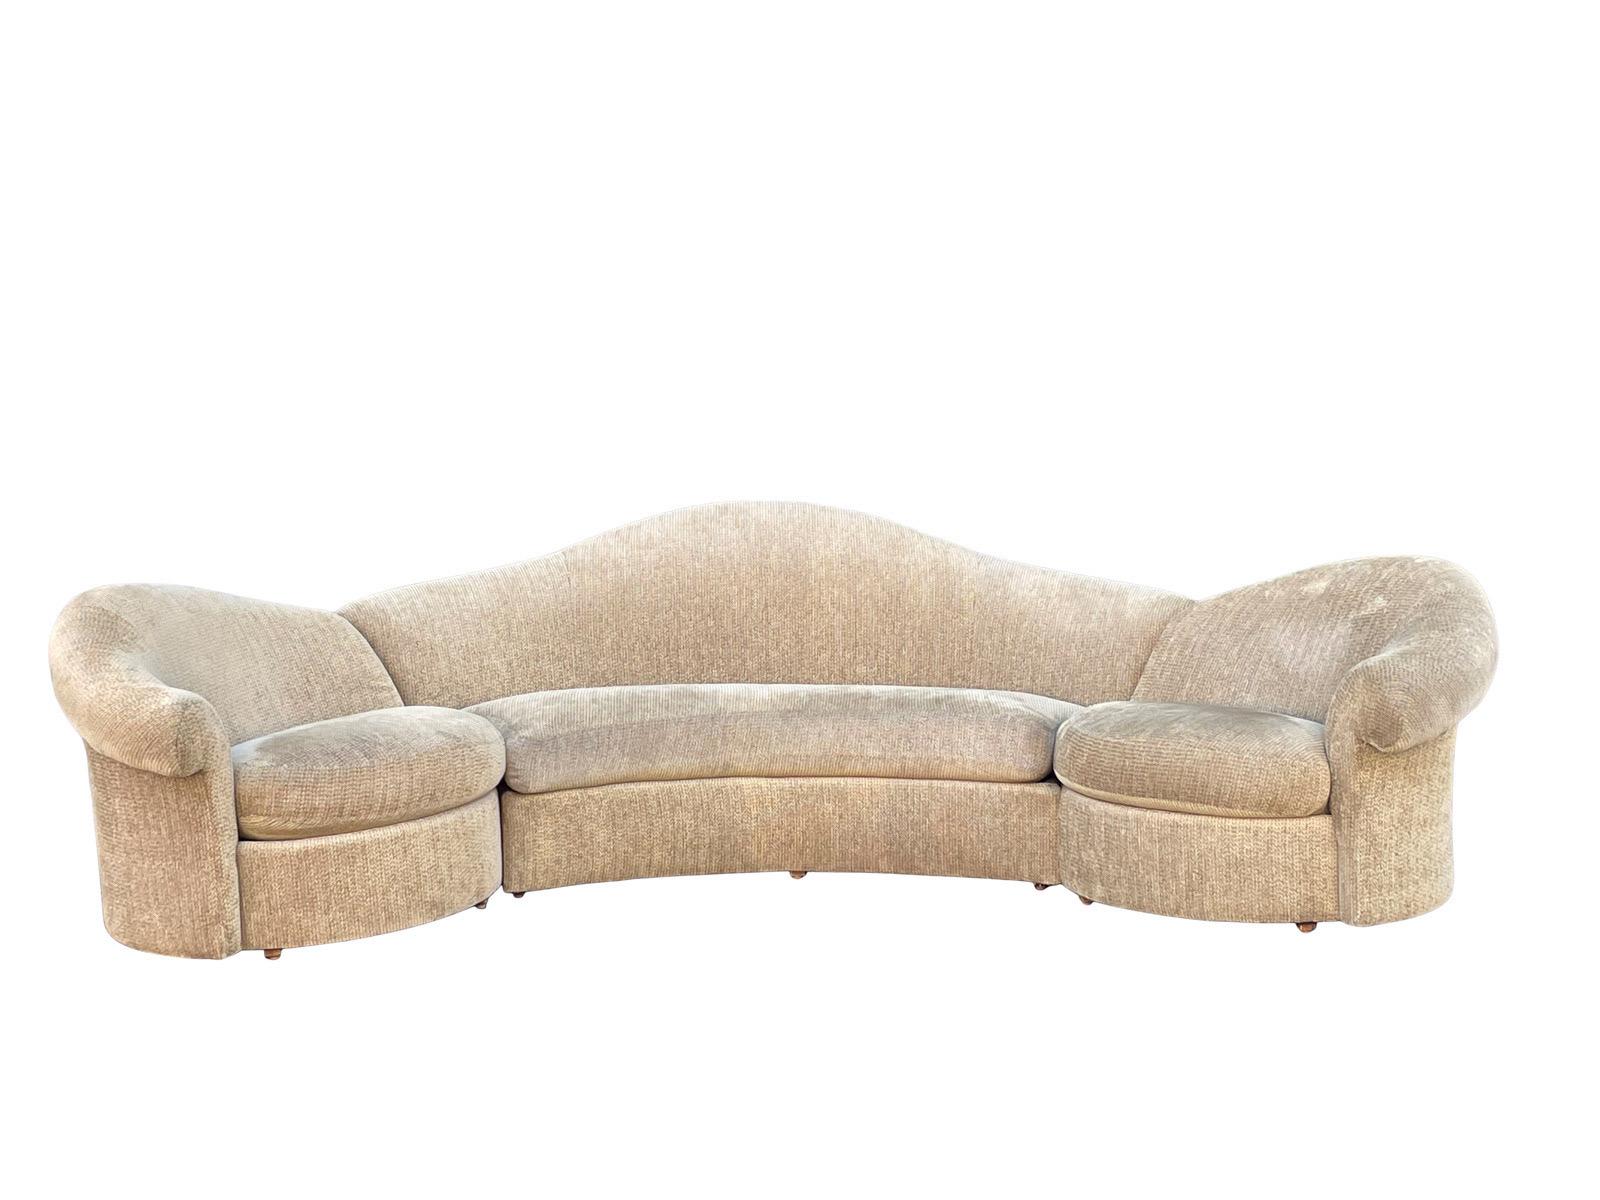 1990s Sculptural Sectional Designer Sofa In Good Condition For Sale In Bensalem, PA